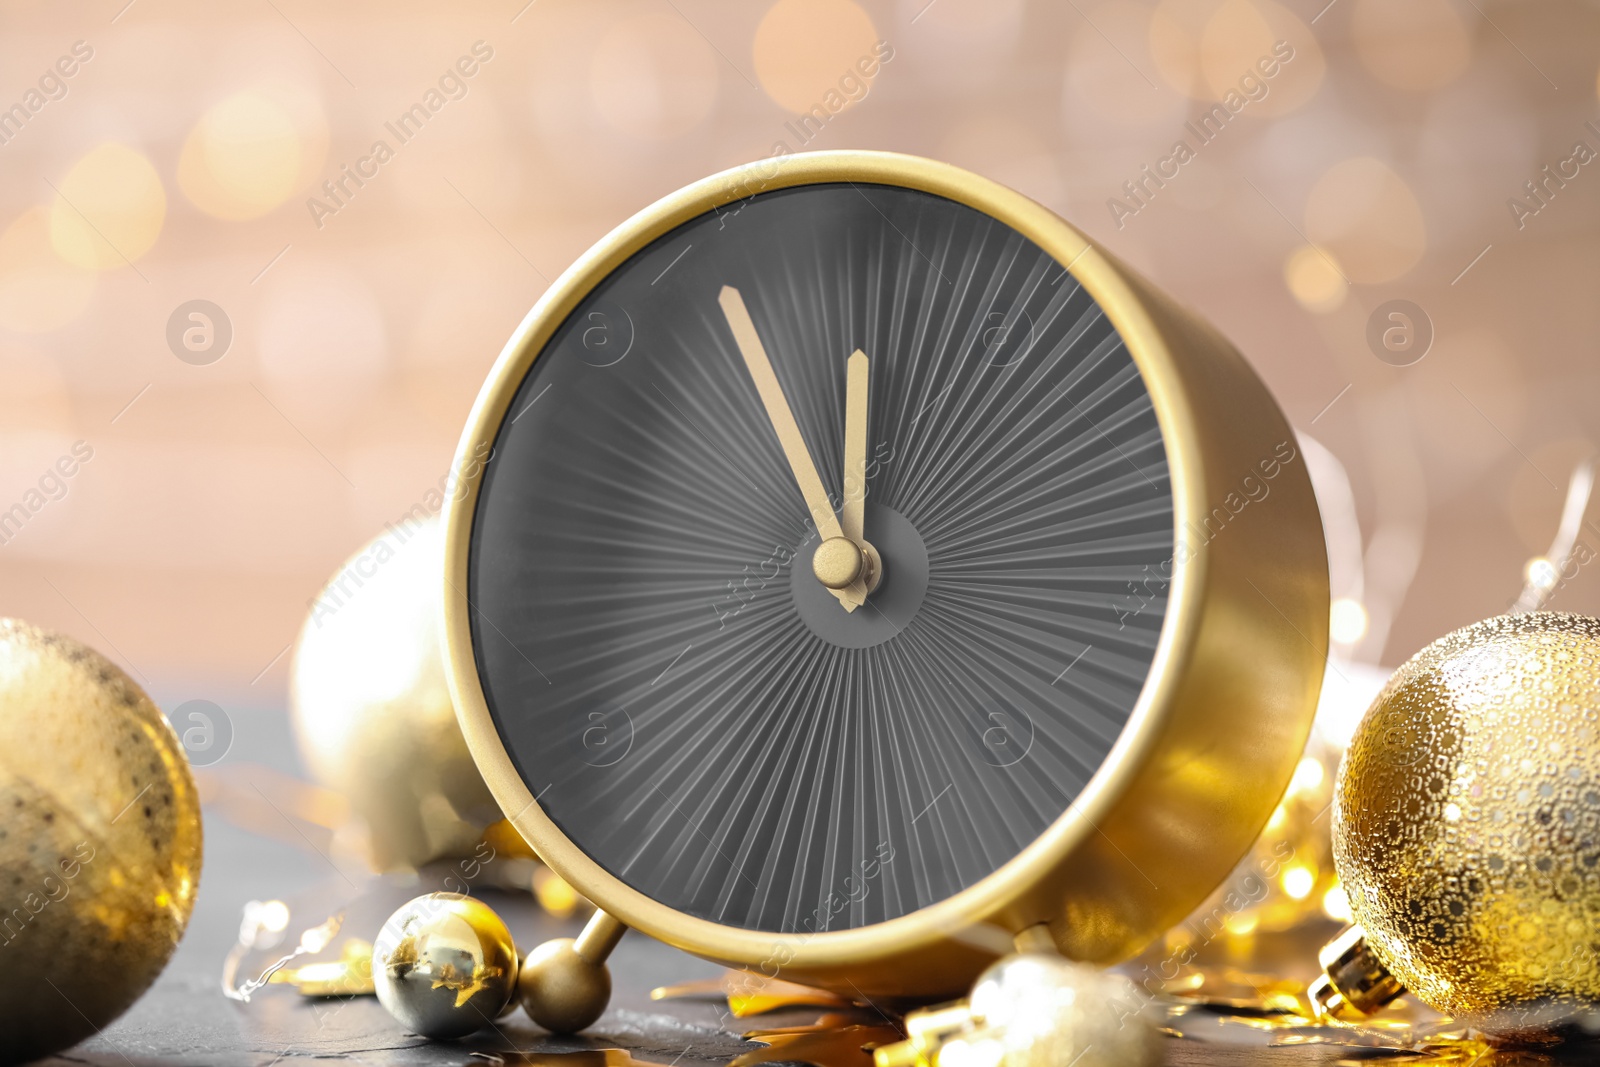 Photo of Stylish clock with decor on black table against blurred Christmas lights, closeup. New Year countdown